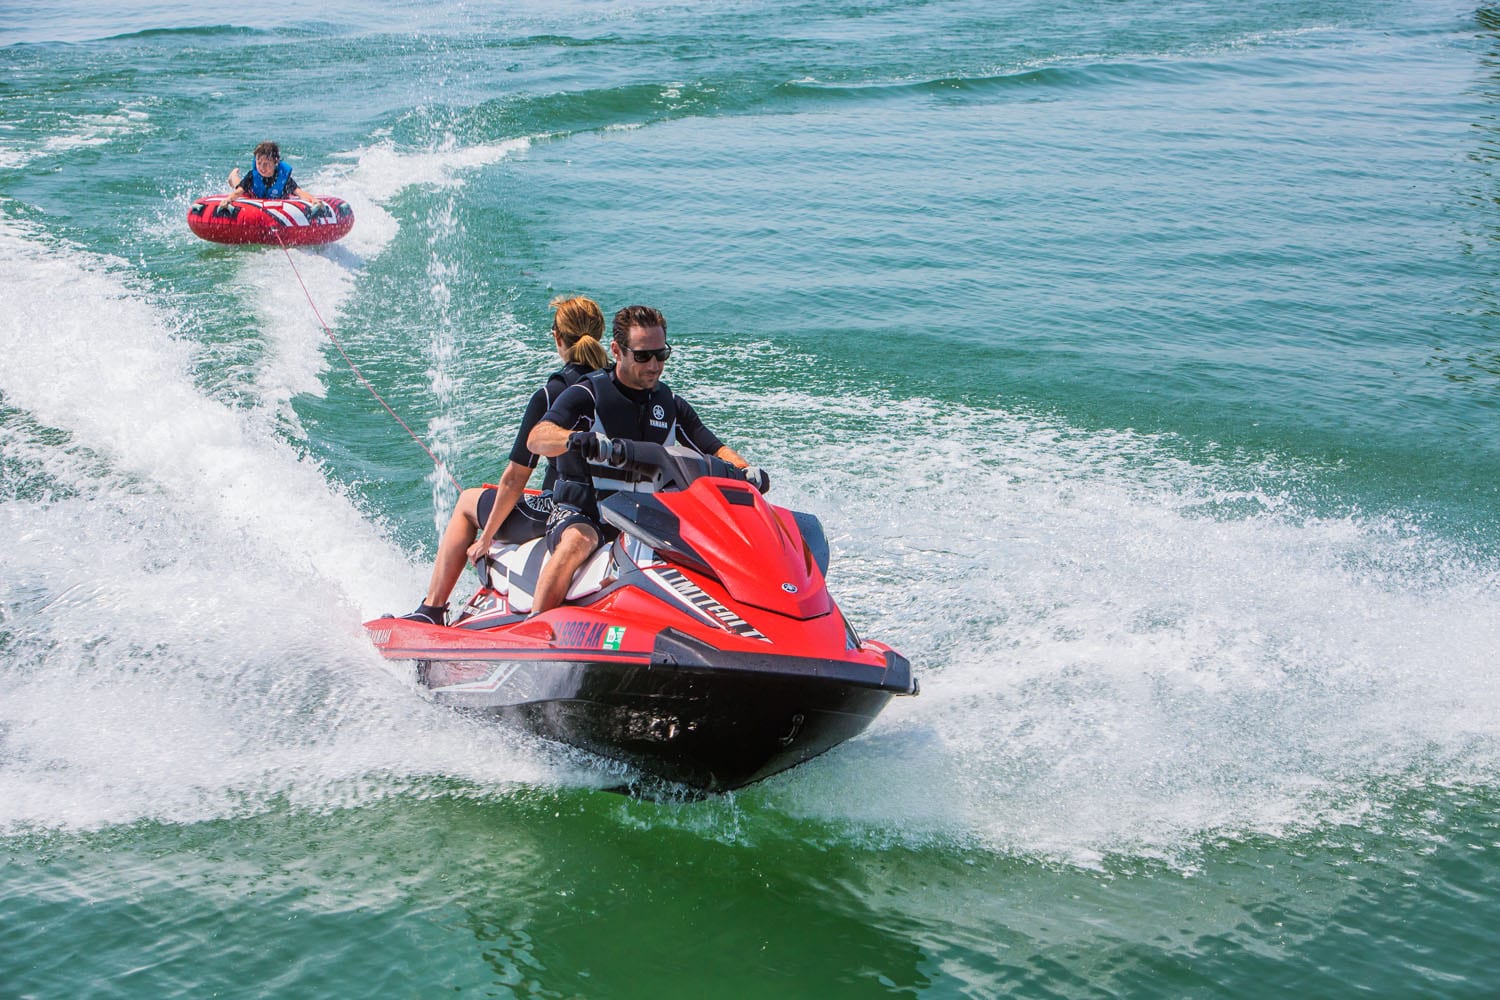 Jet ski surge at Canyon Lake leads to safety concerns and violations